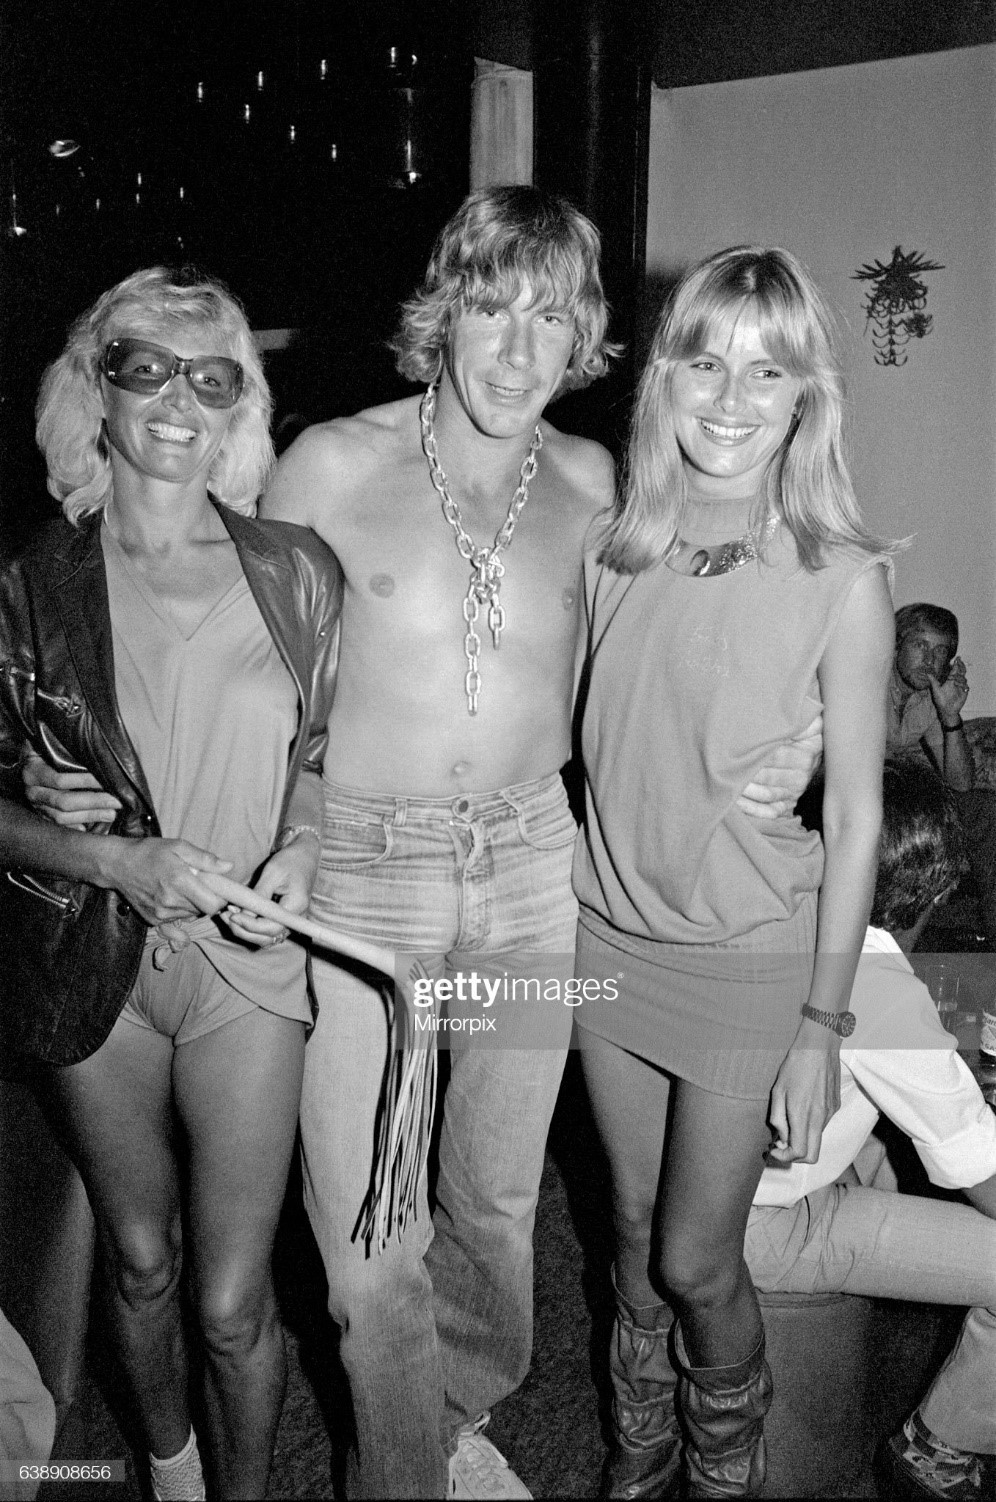 James Hunt with two girls in the night club in Marbella, Spain, that he owns. 